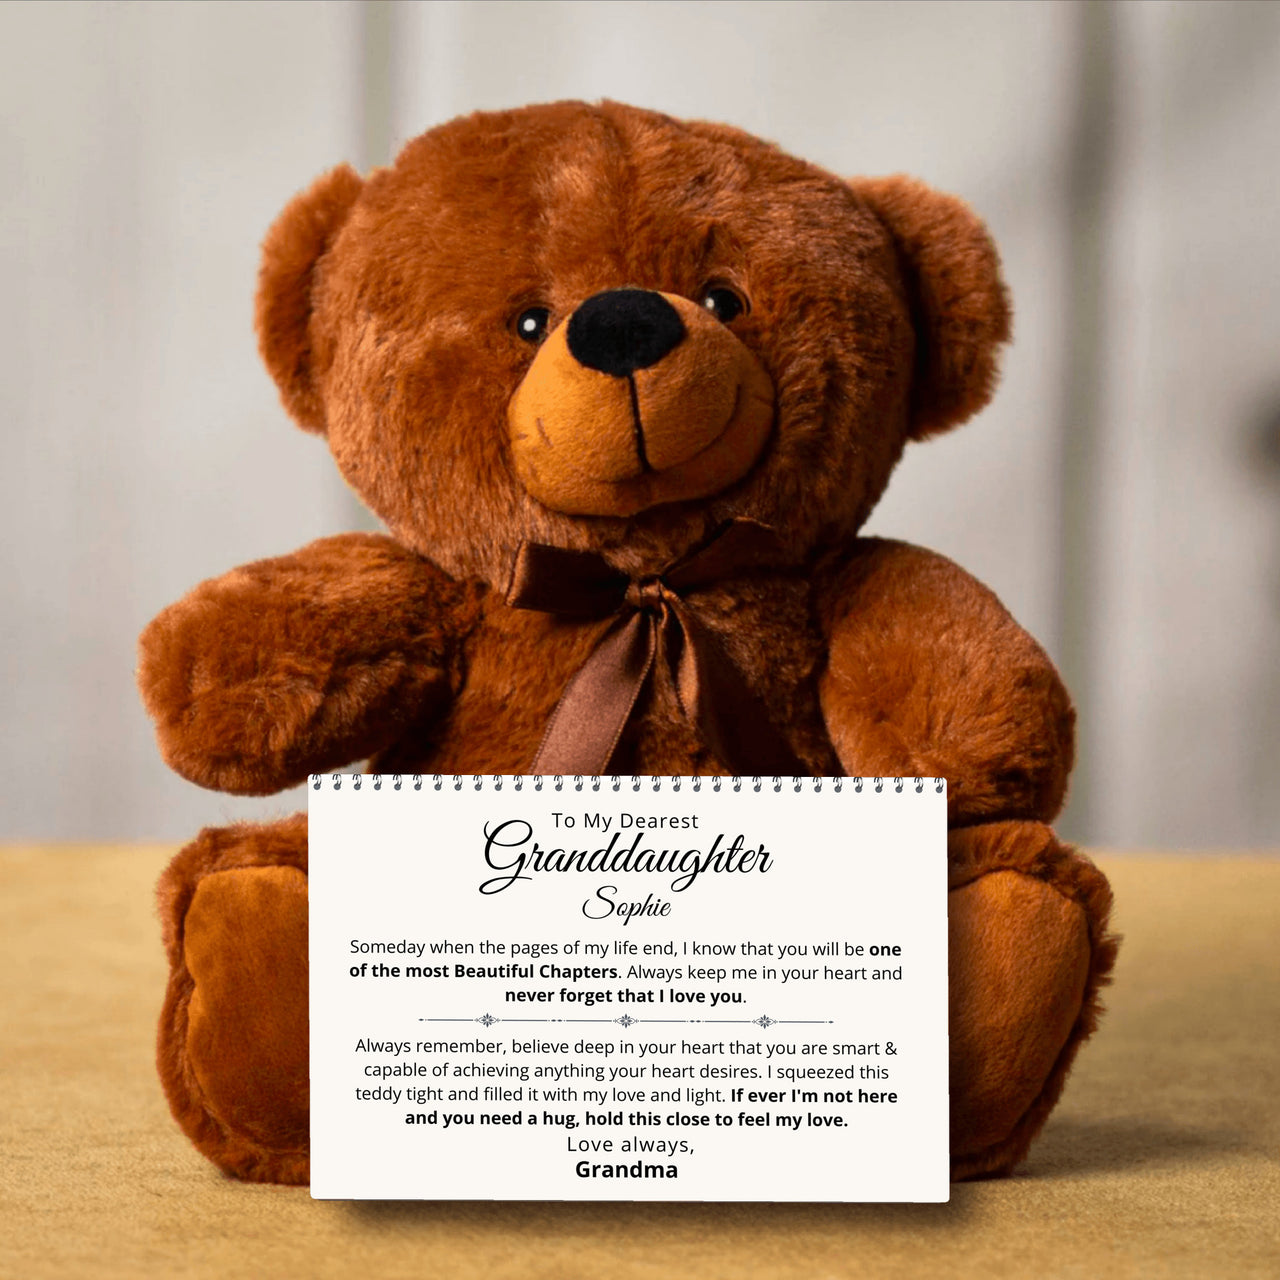 Granddaughter, Never Forget - Teddy Bear with Personalized Canvas Message Card (GD78)